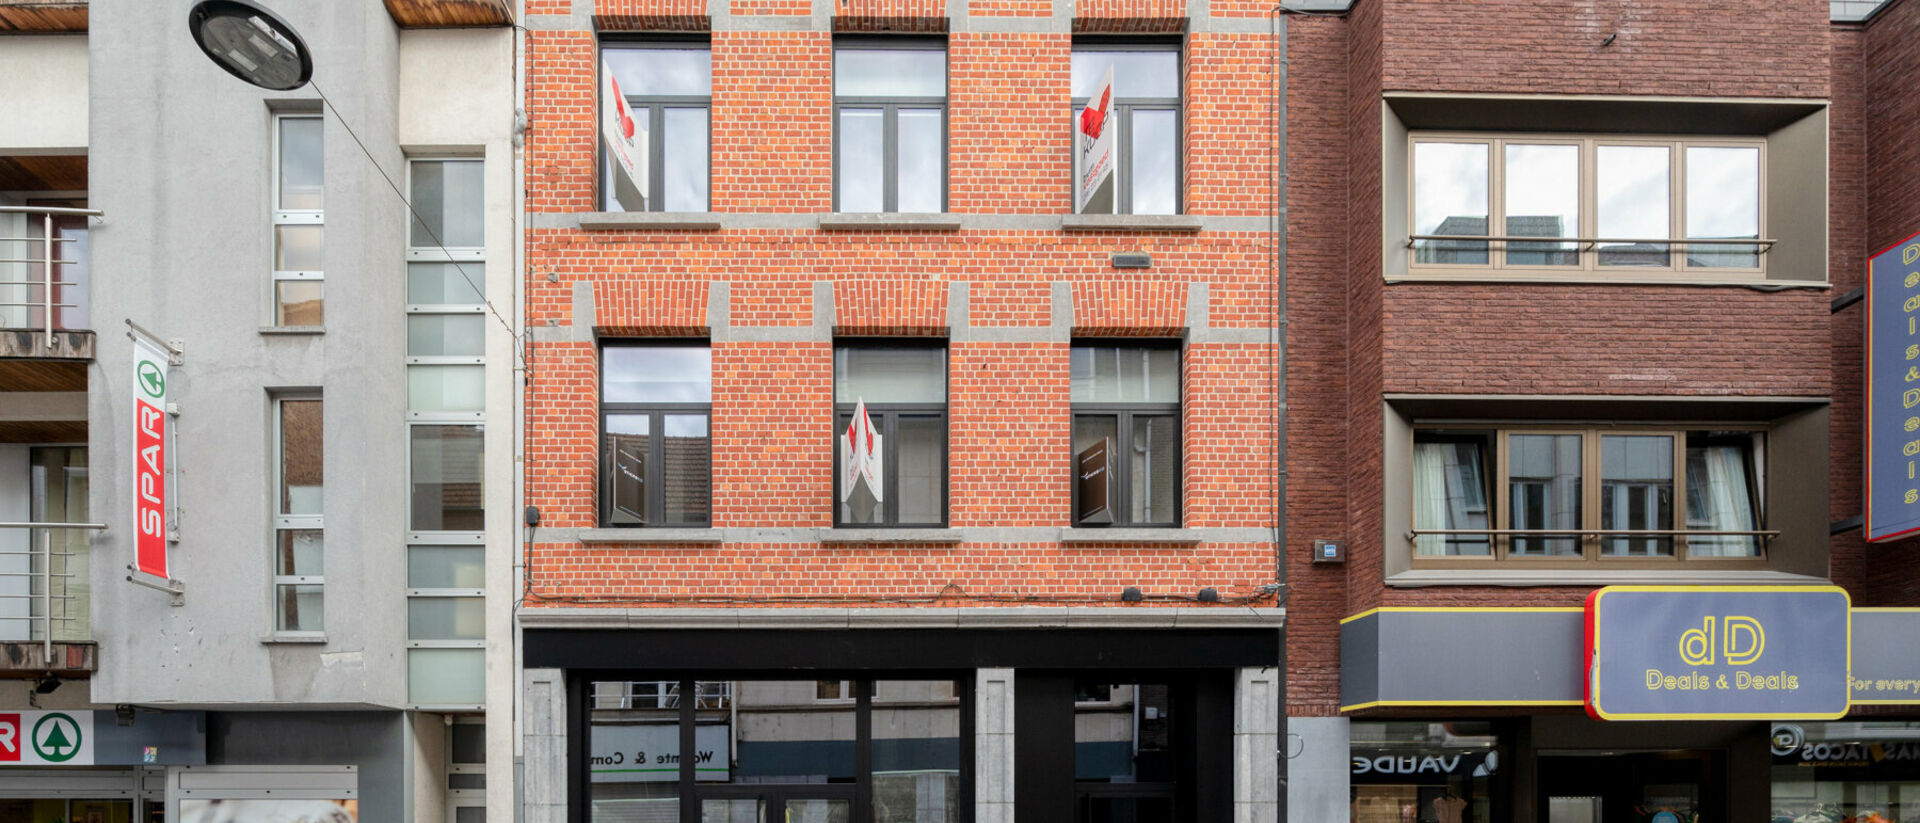 This renovated building (almost new construction) includes a trade, a one-bedroom flat with outdoor space and 10 student rooms own sanitary facilities renovated to state-of-the-art standards. Behind the authentic façade, this project was completely gutte